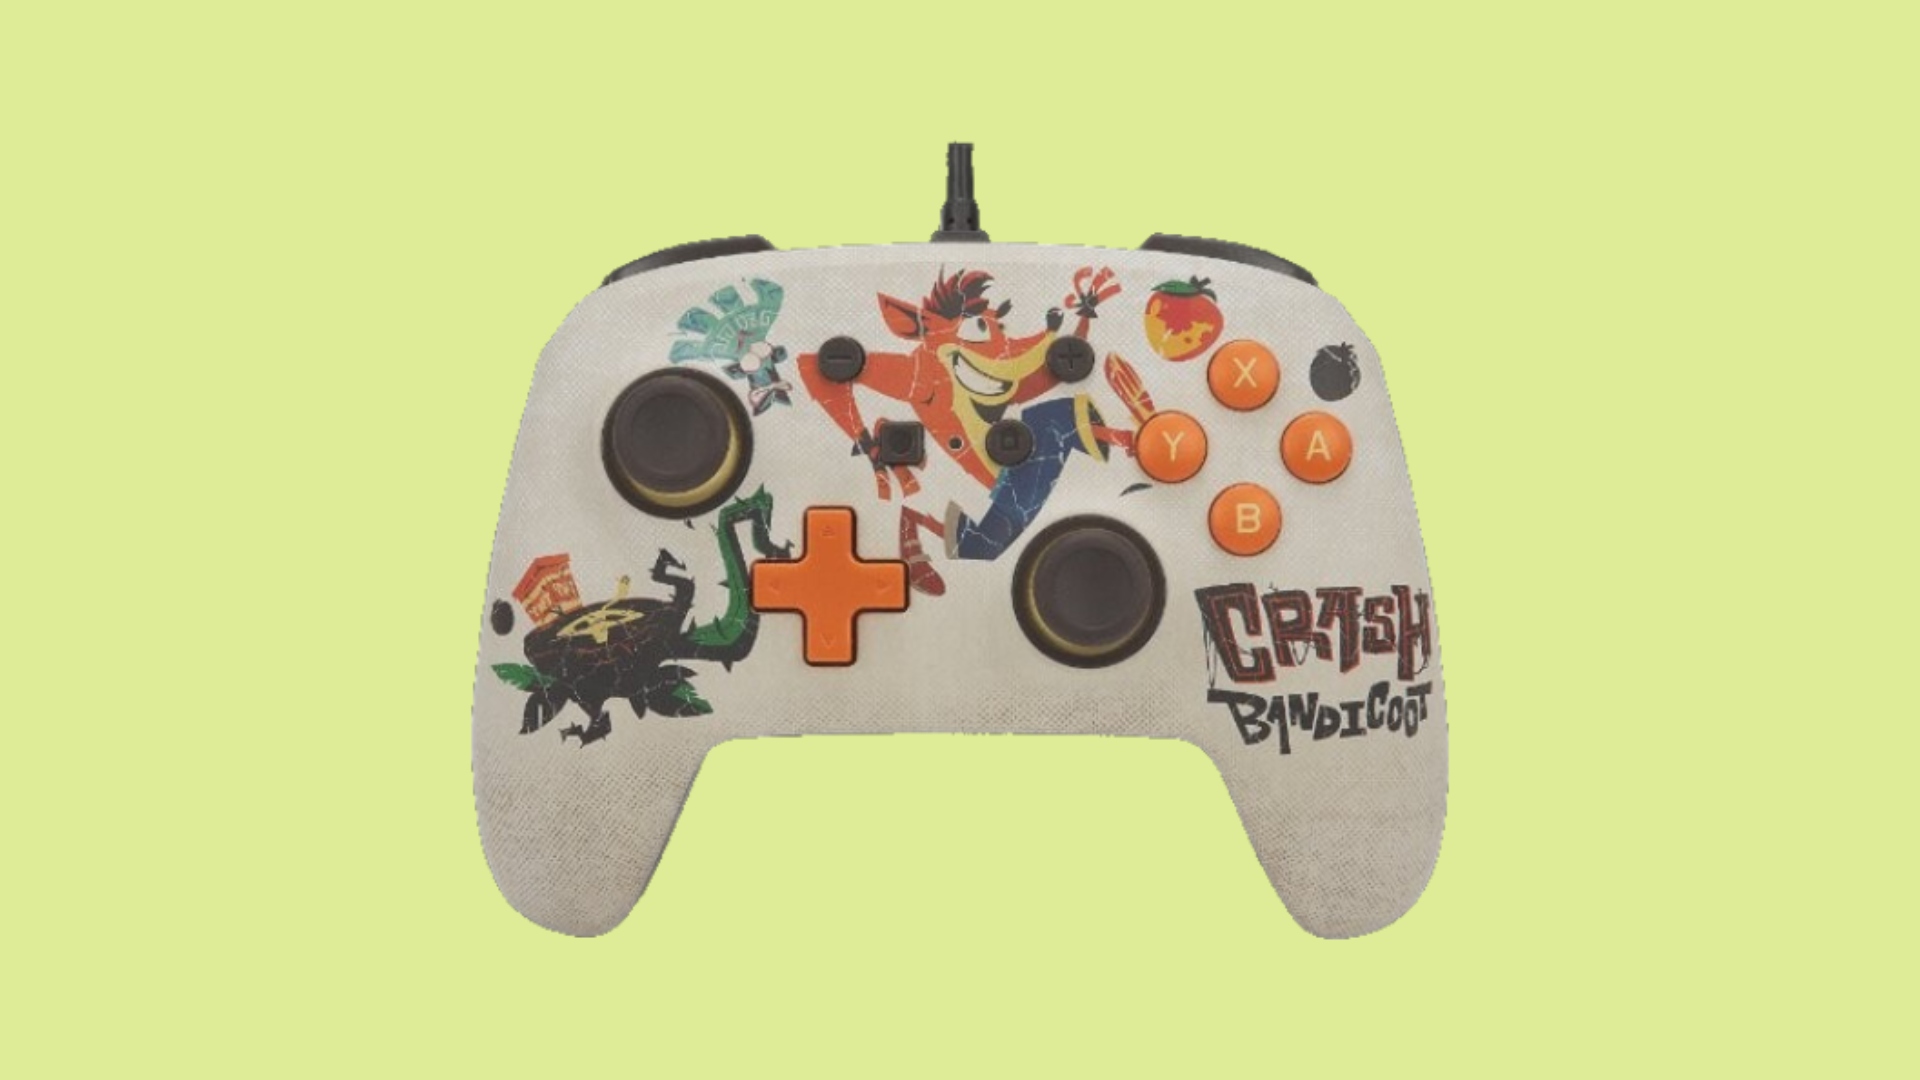 Best Nintendo Switch controllers: image shows a Switch controller with a picture of Crash Bandicoot on it.